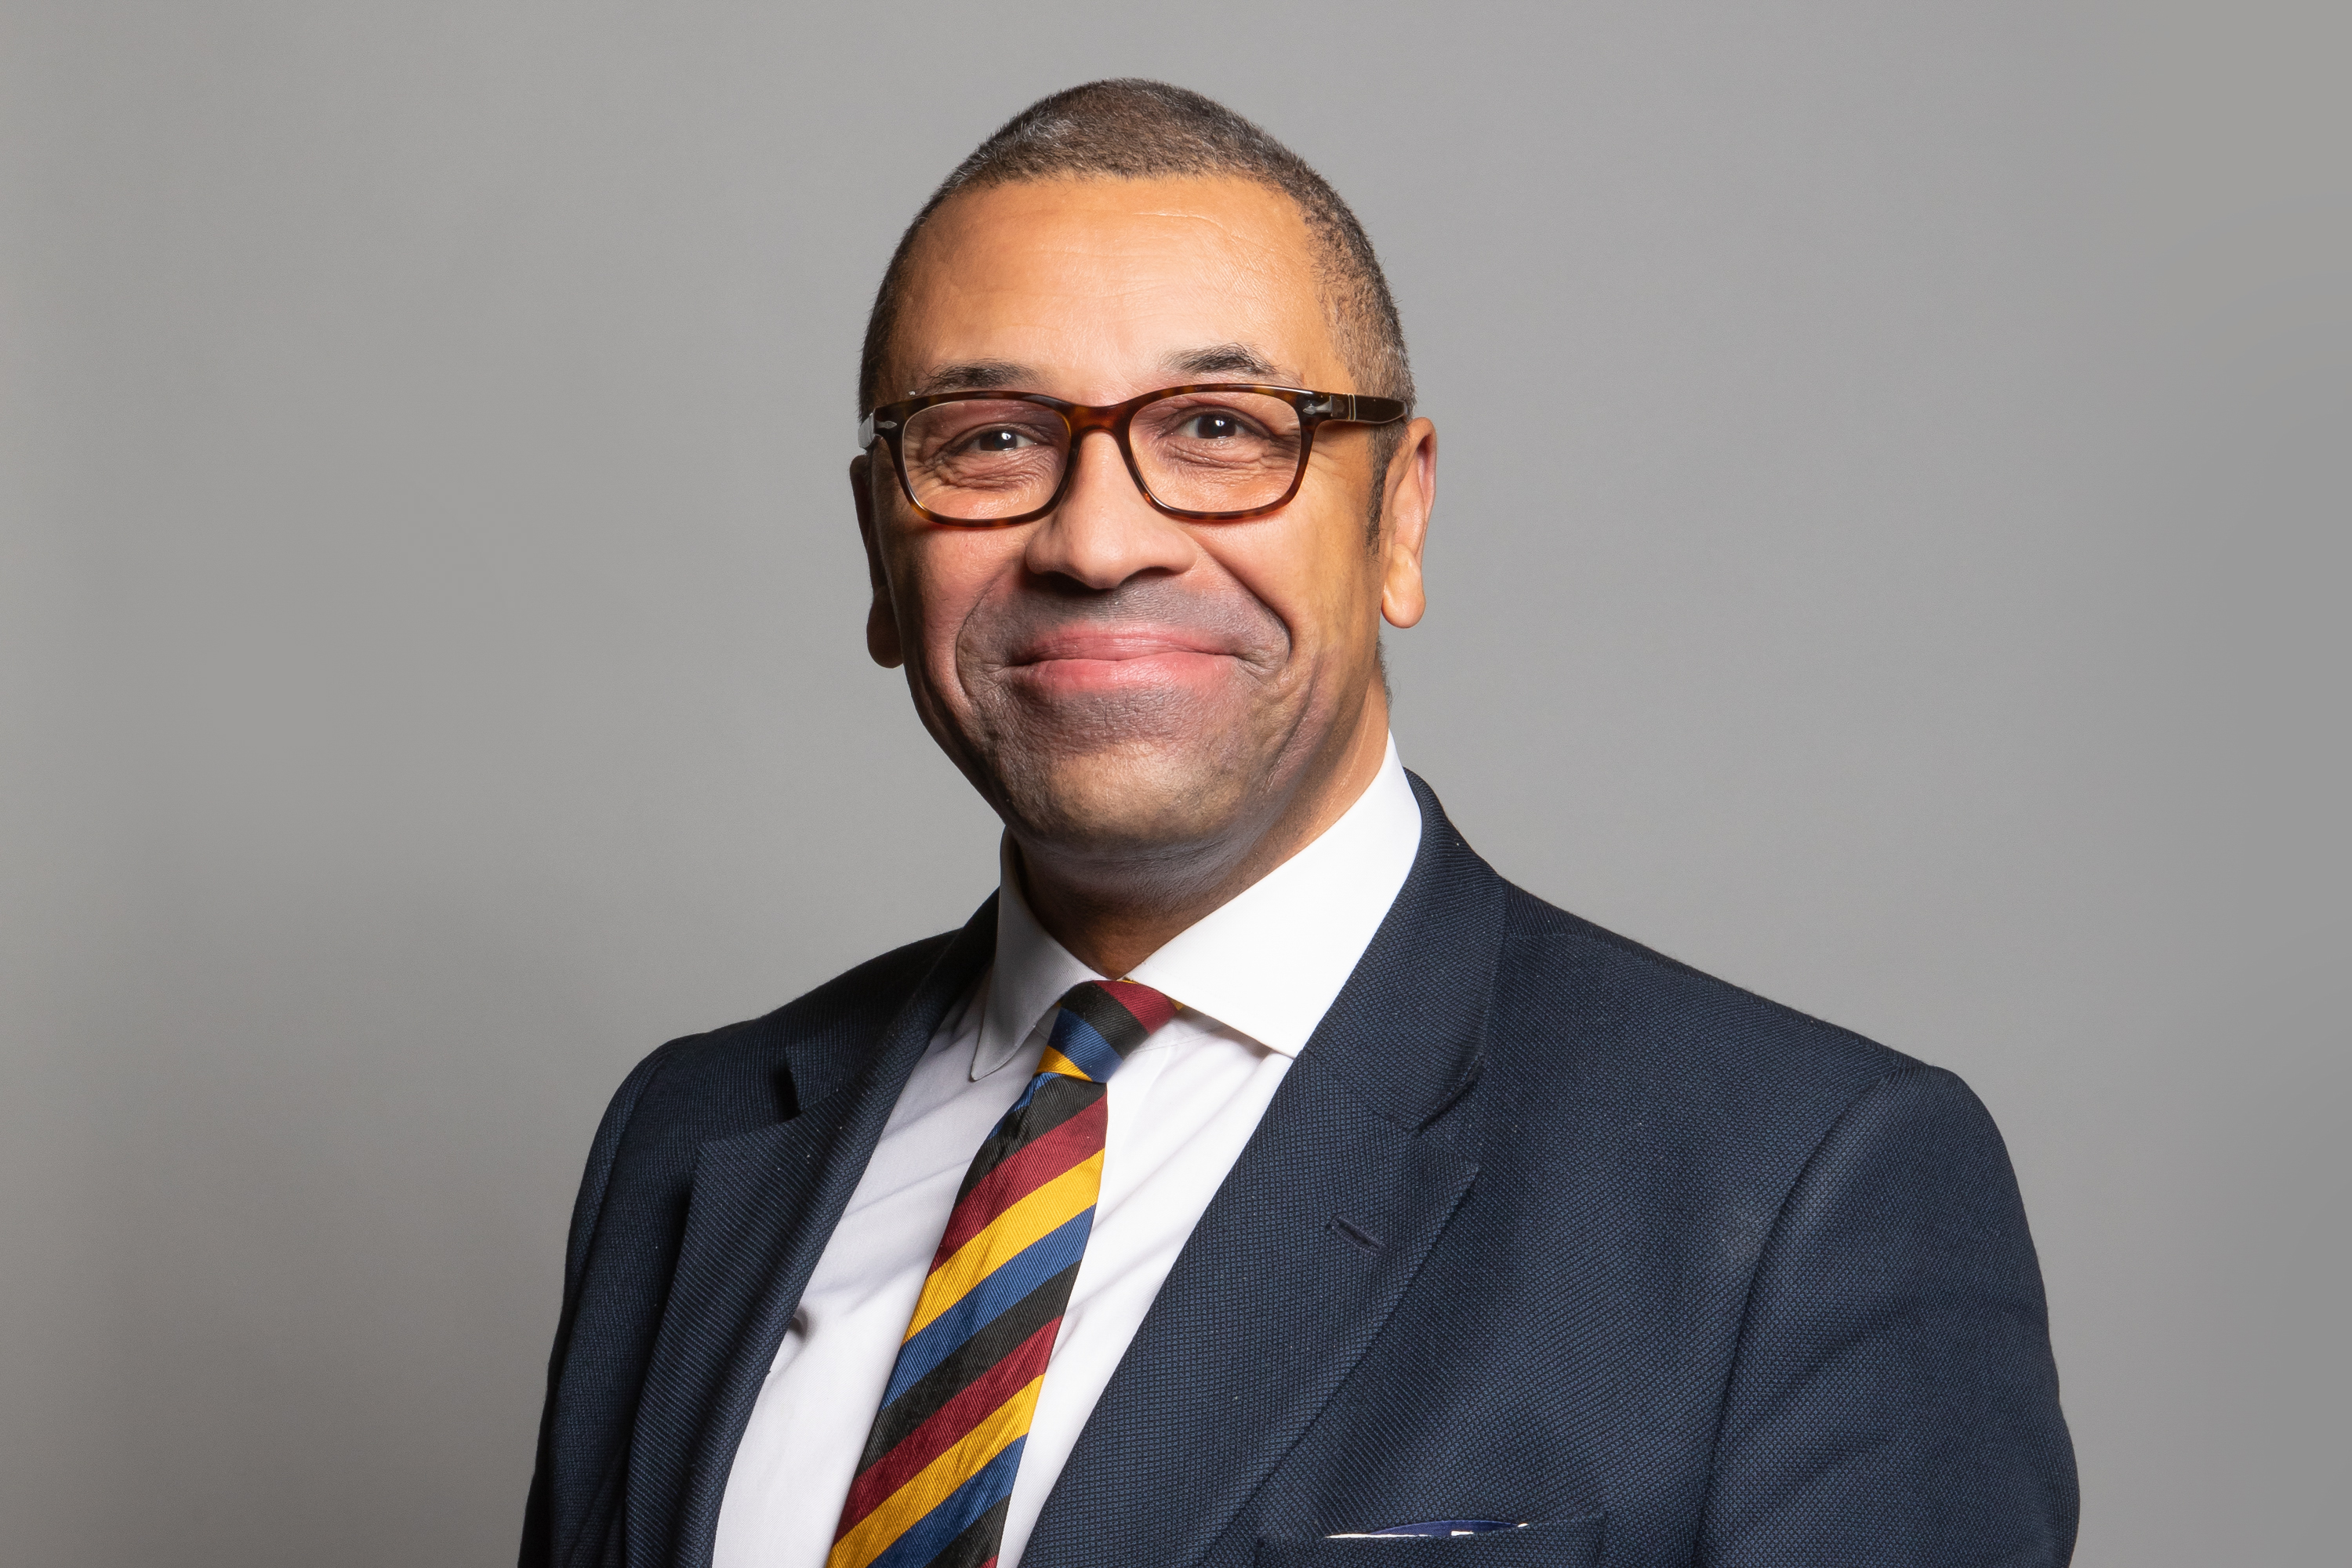 Rt. Hon. James Cleverly MP